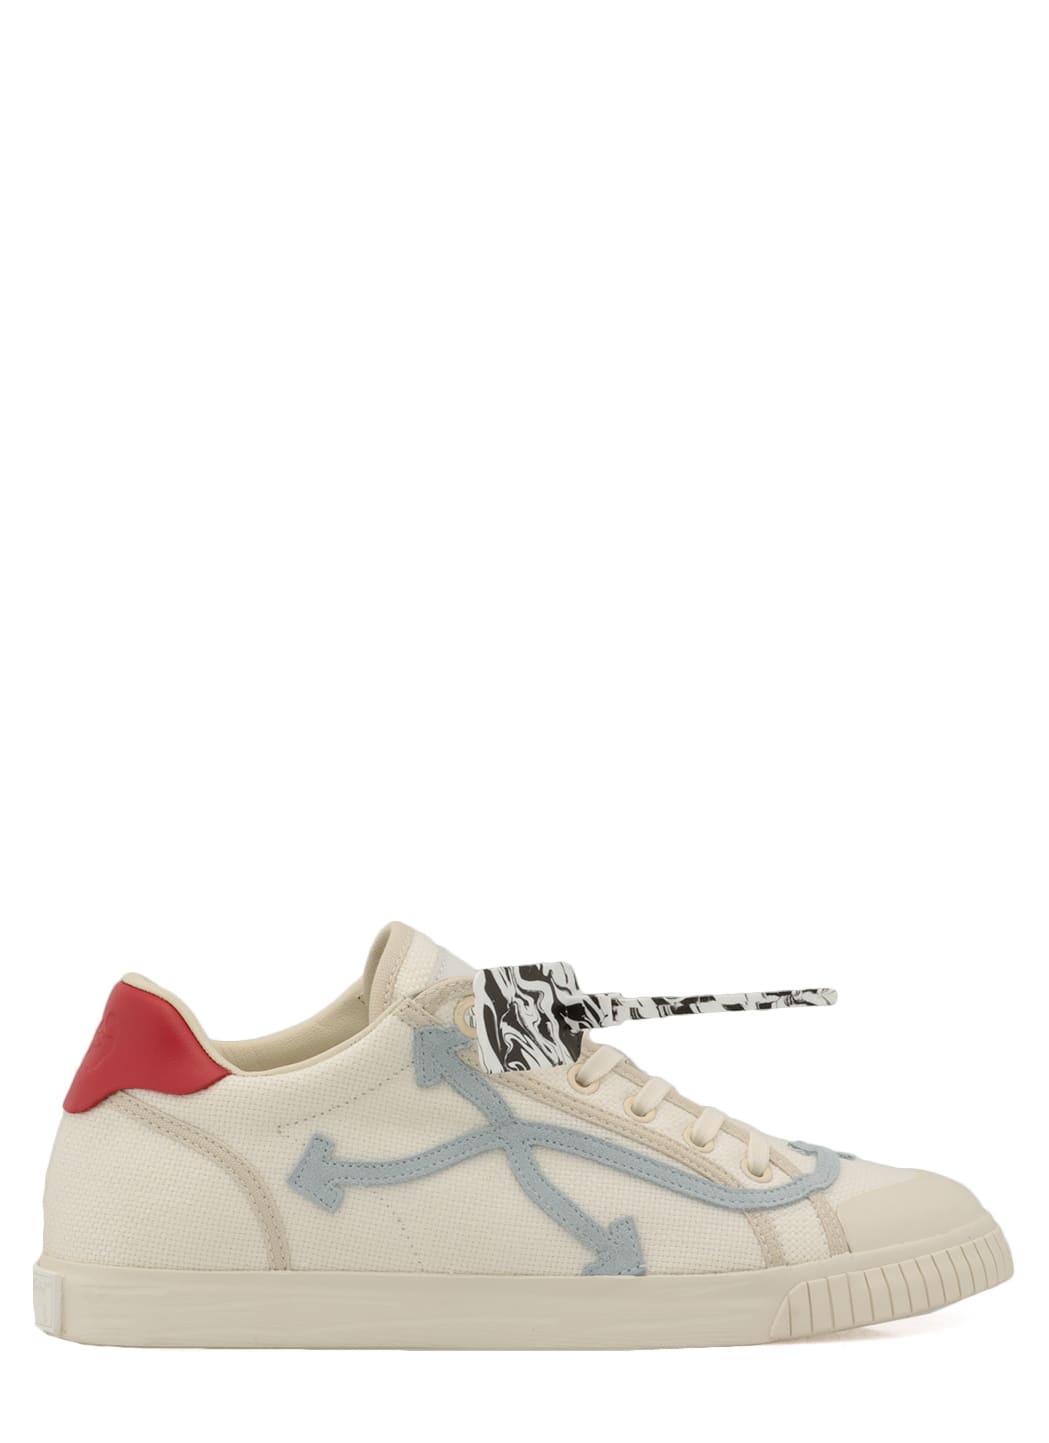 OFF-WHITE LEATHER AND FABRIC SNEAKER,OMIA213S21FAB001 NEW LOW VULCAN CANVAS0140